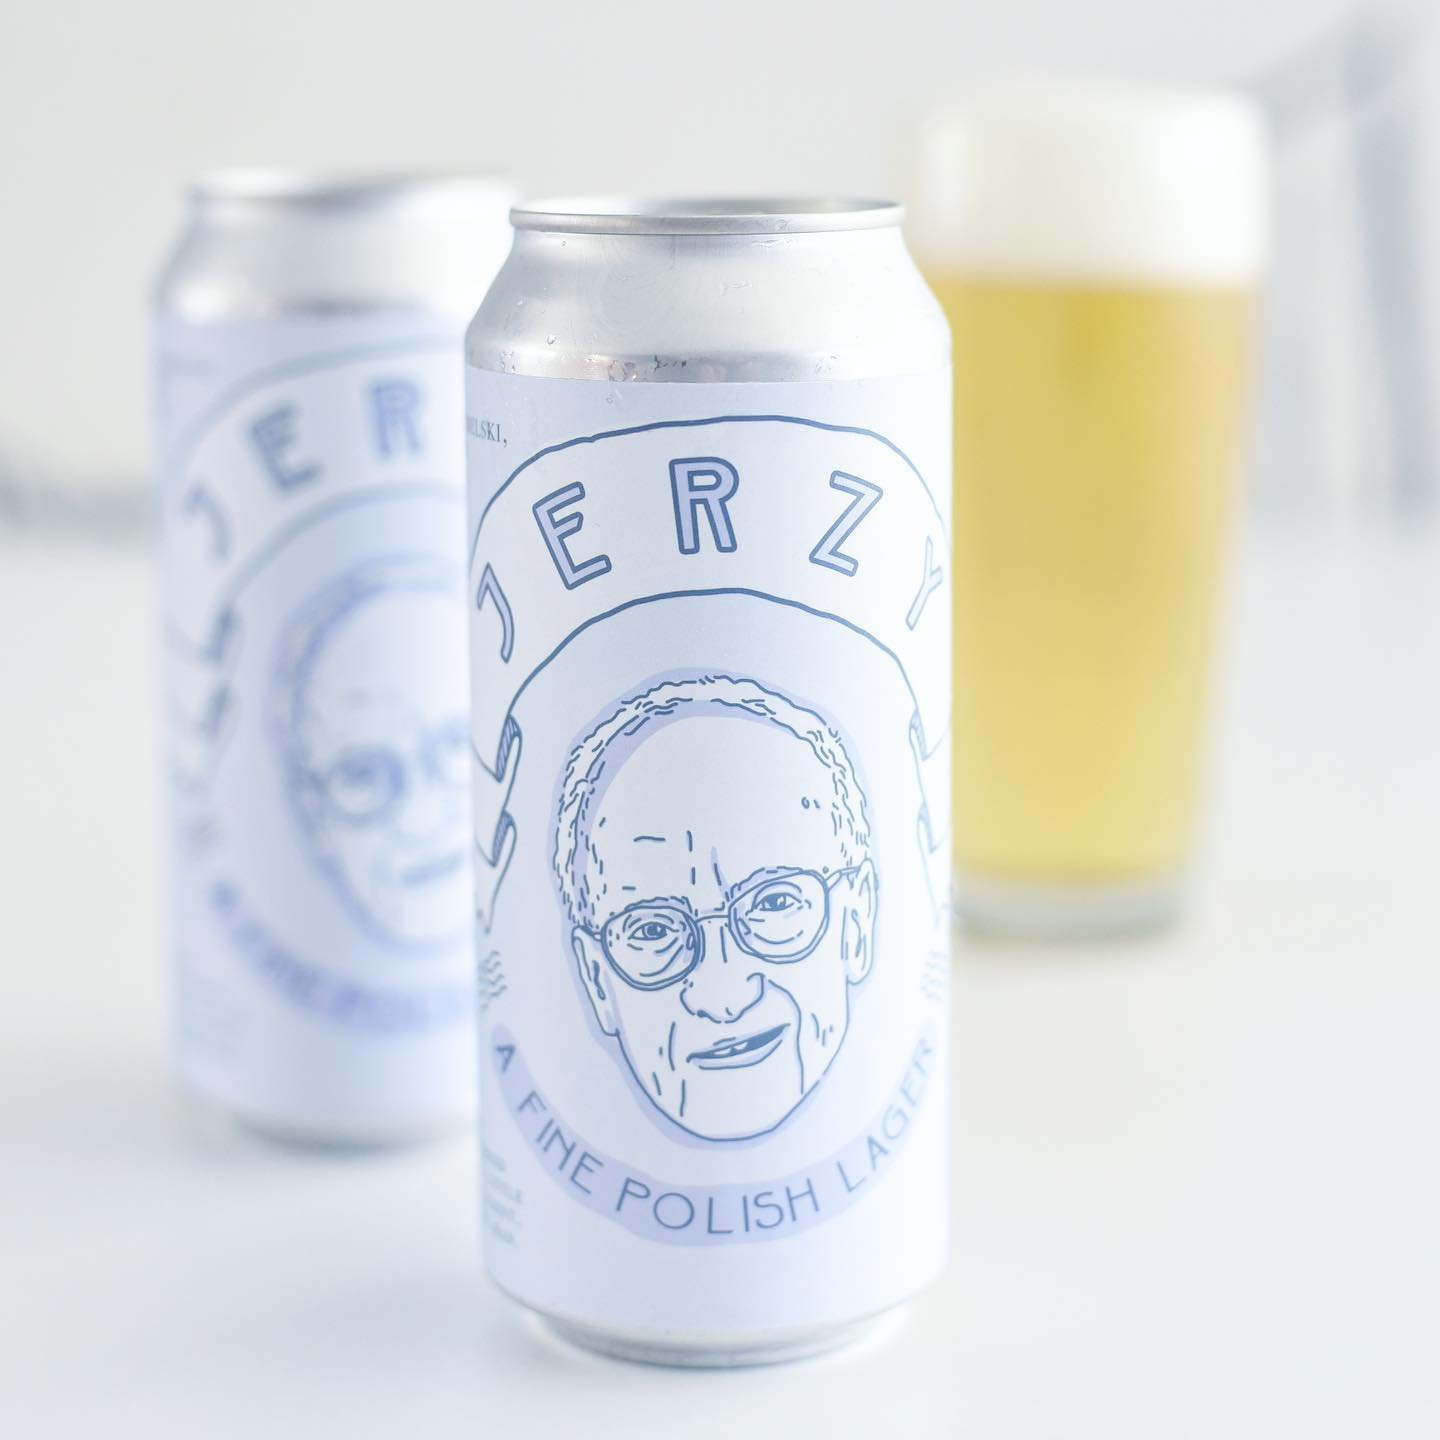 One of Dallas’ Best New Beers Honors the Life and Legacy of a Holocaust Survivor